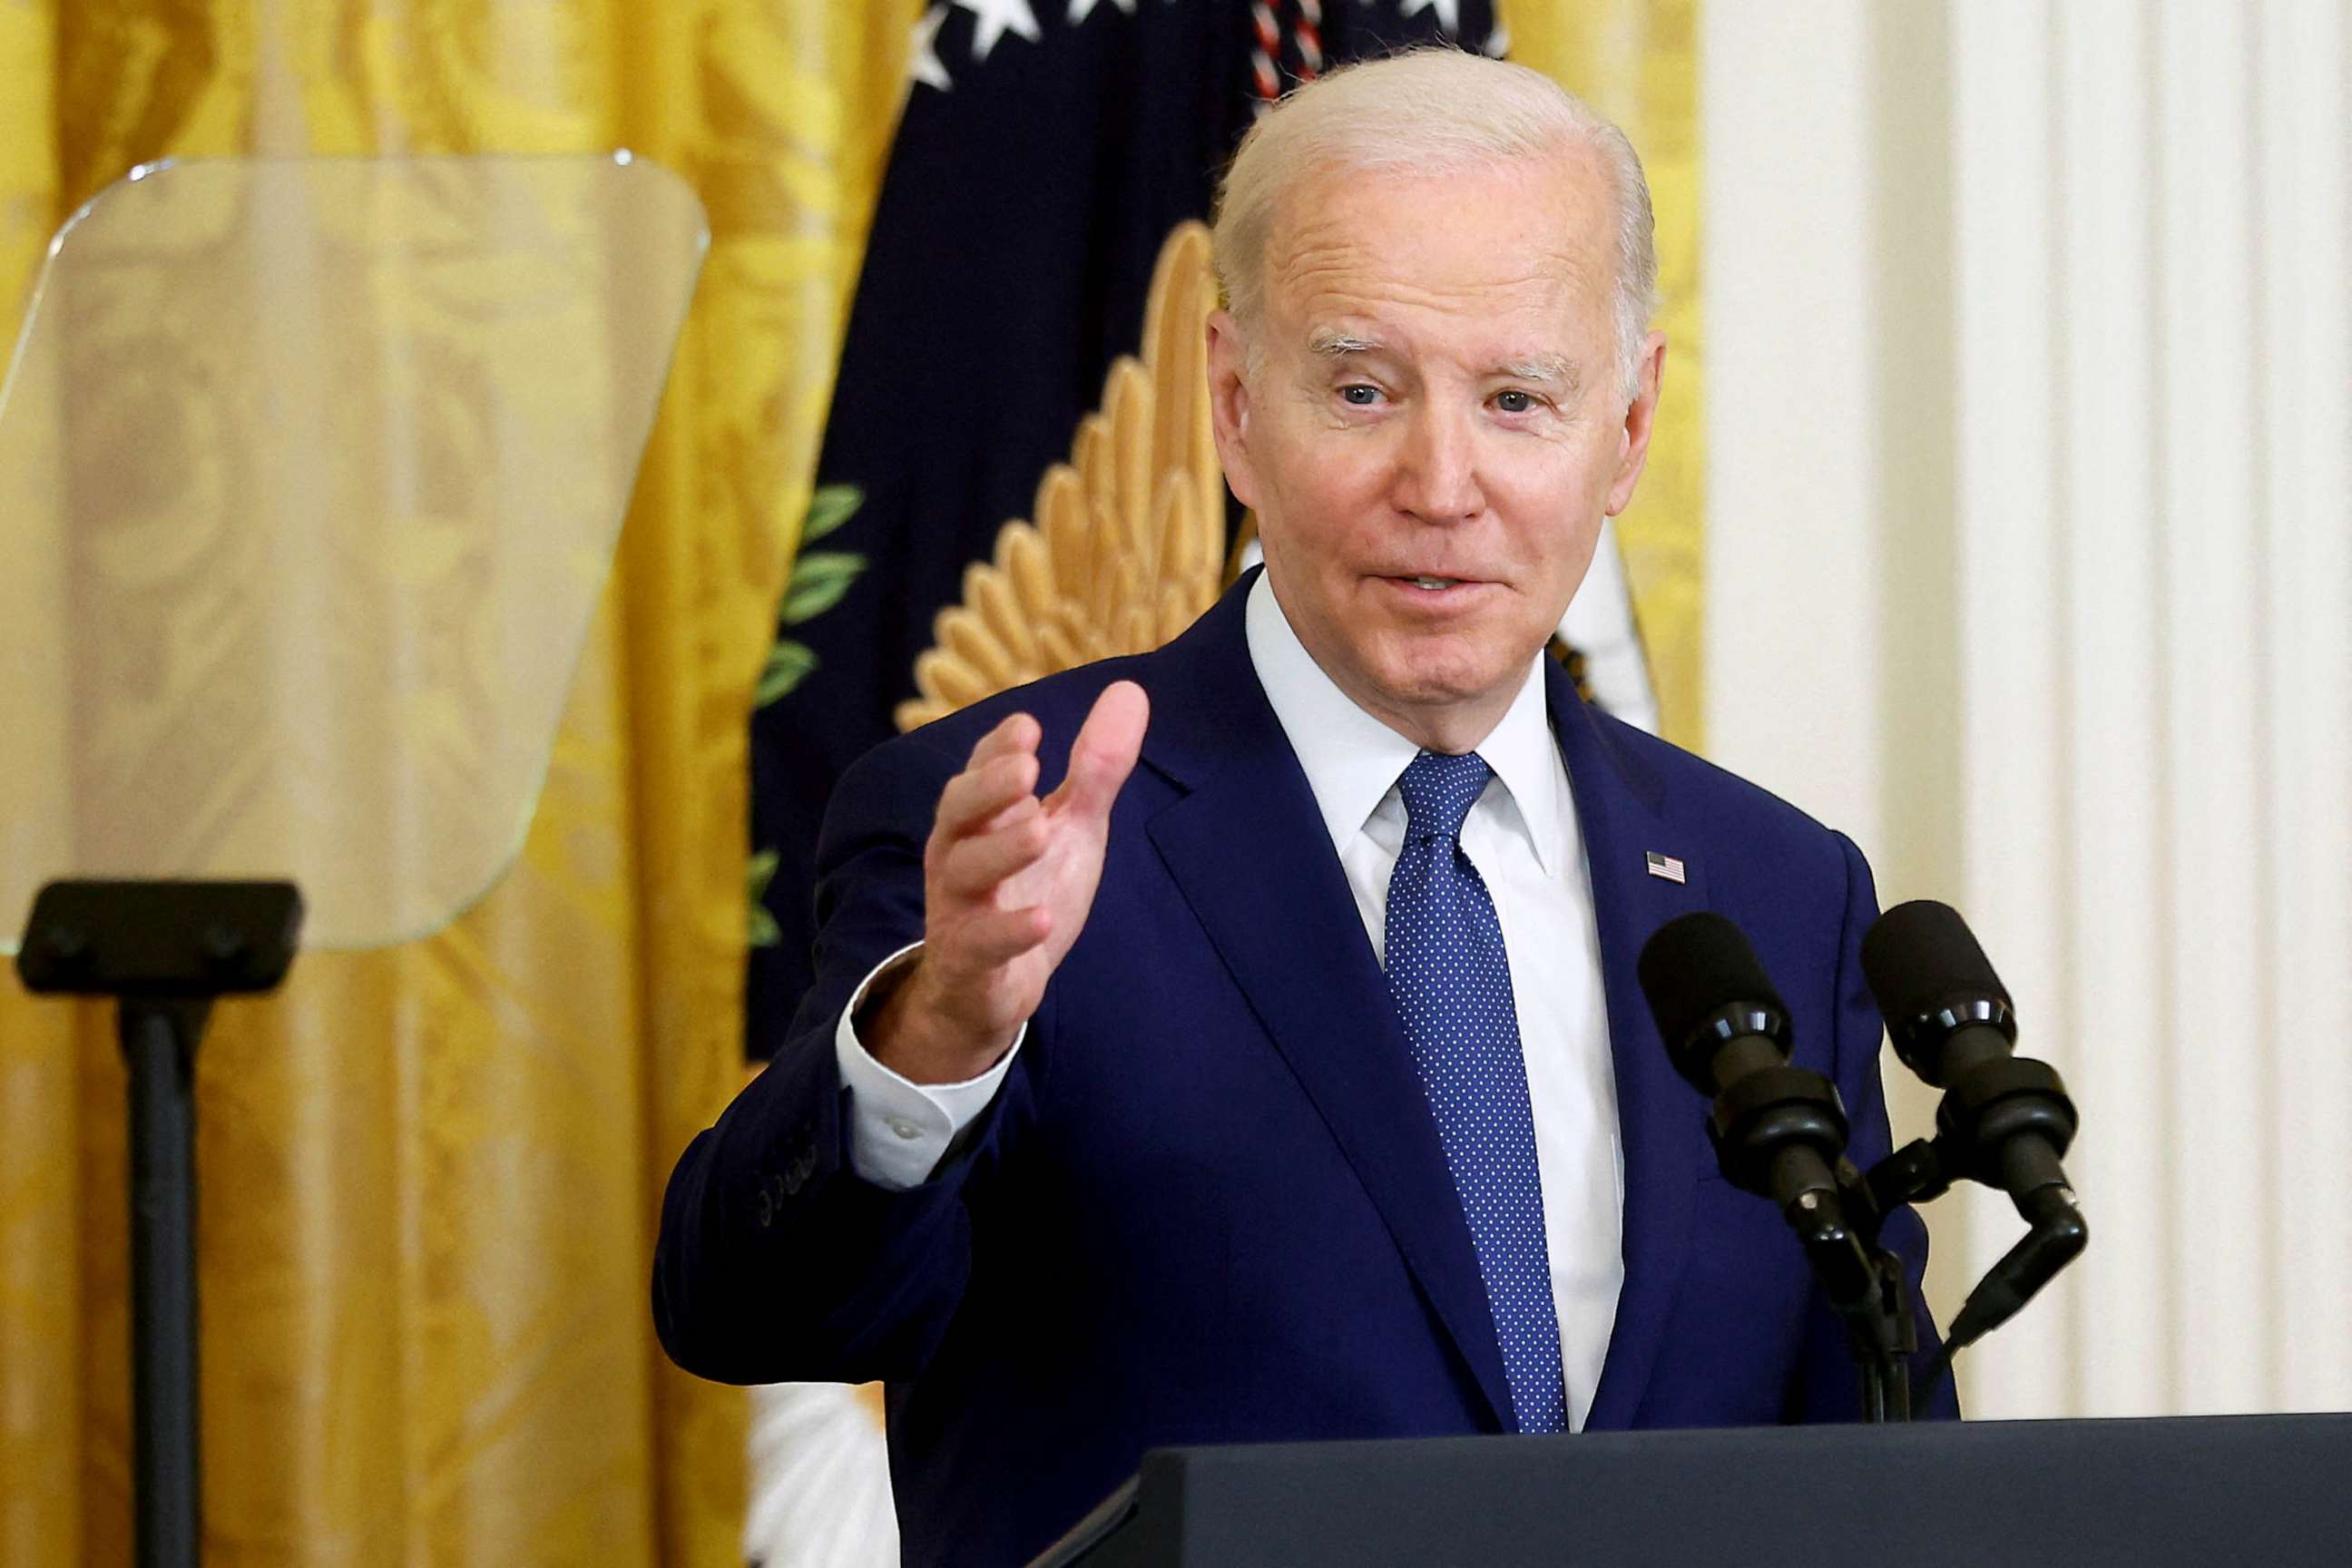 PHOTO: U.S. President Joe Biden delivers remarks on the 13th anniversary of passage of the Affordable Care Act, commonly known as Obamacare, at the White House in Washington, March 23, 2023.